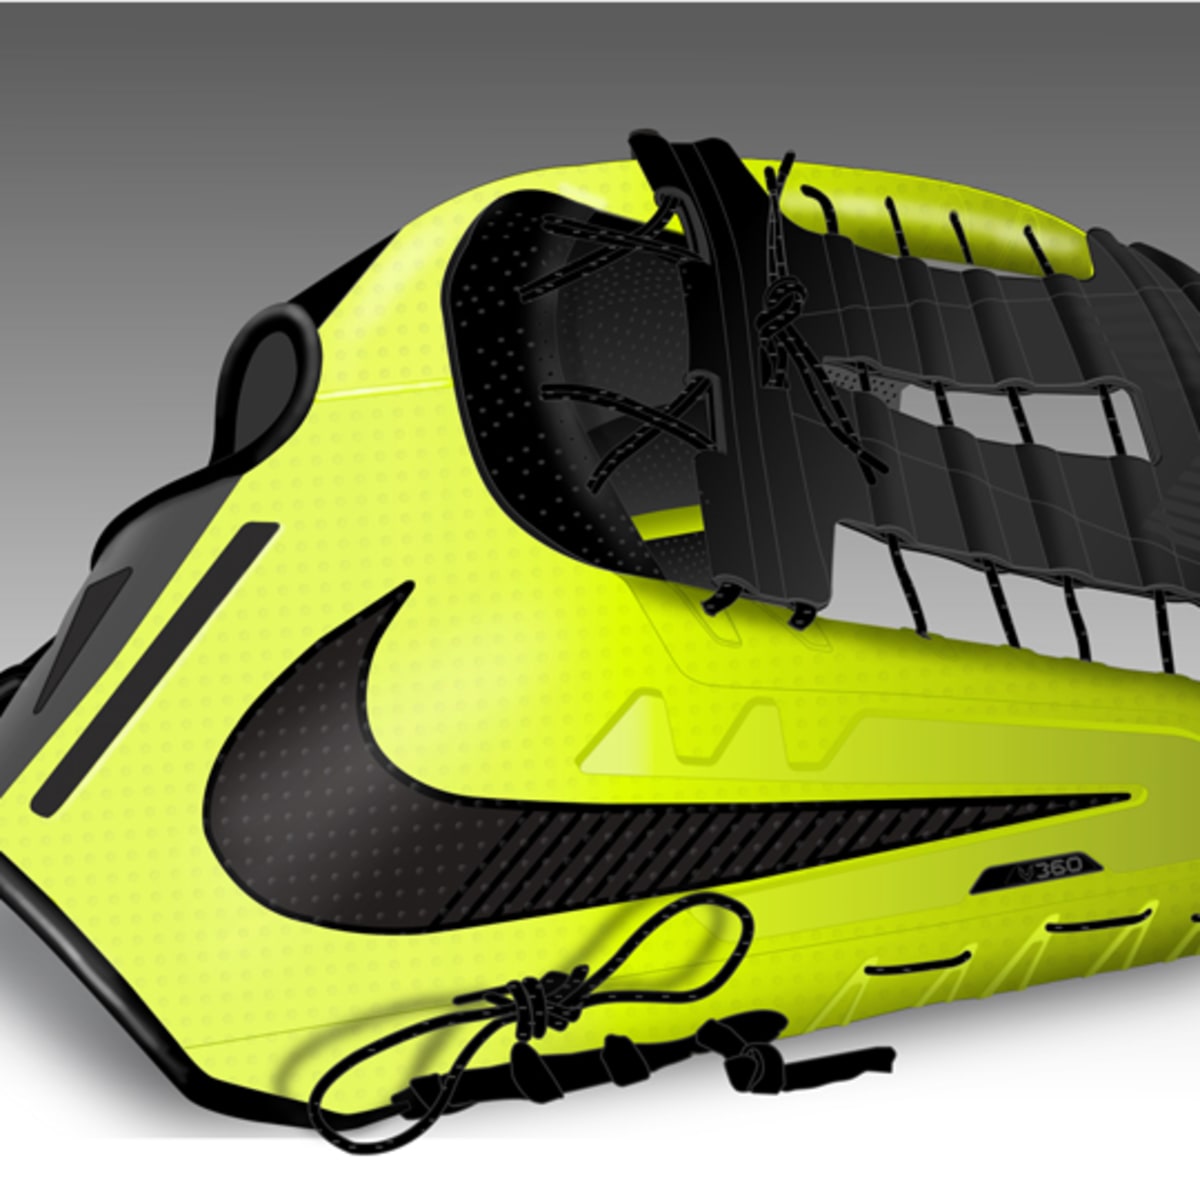 No Love for Leather: Nike's Innovative Vapor 360 Baseball Glove is Here -  Sports Illustrated